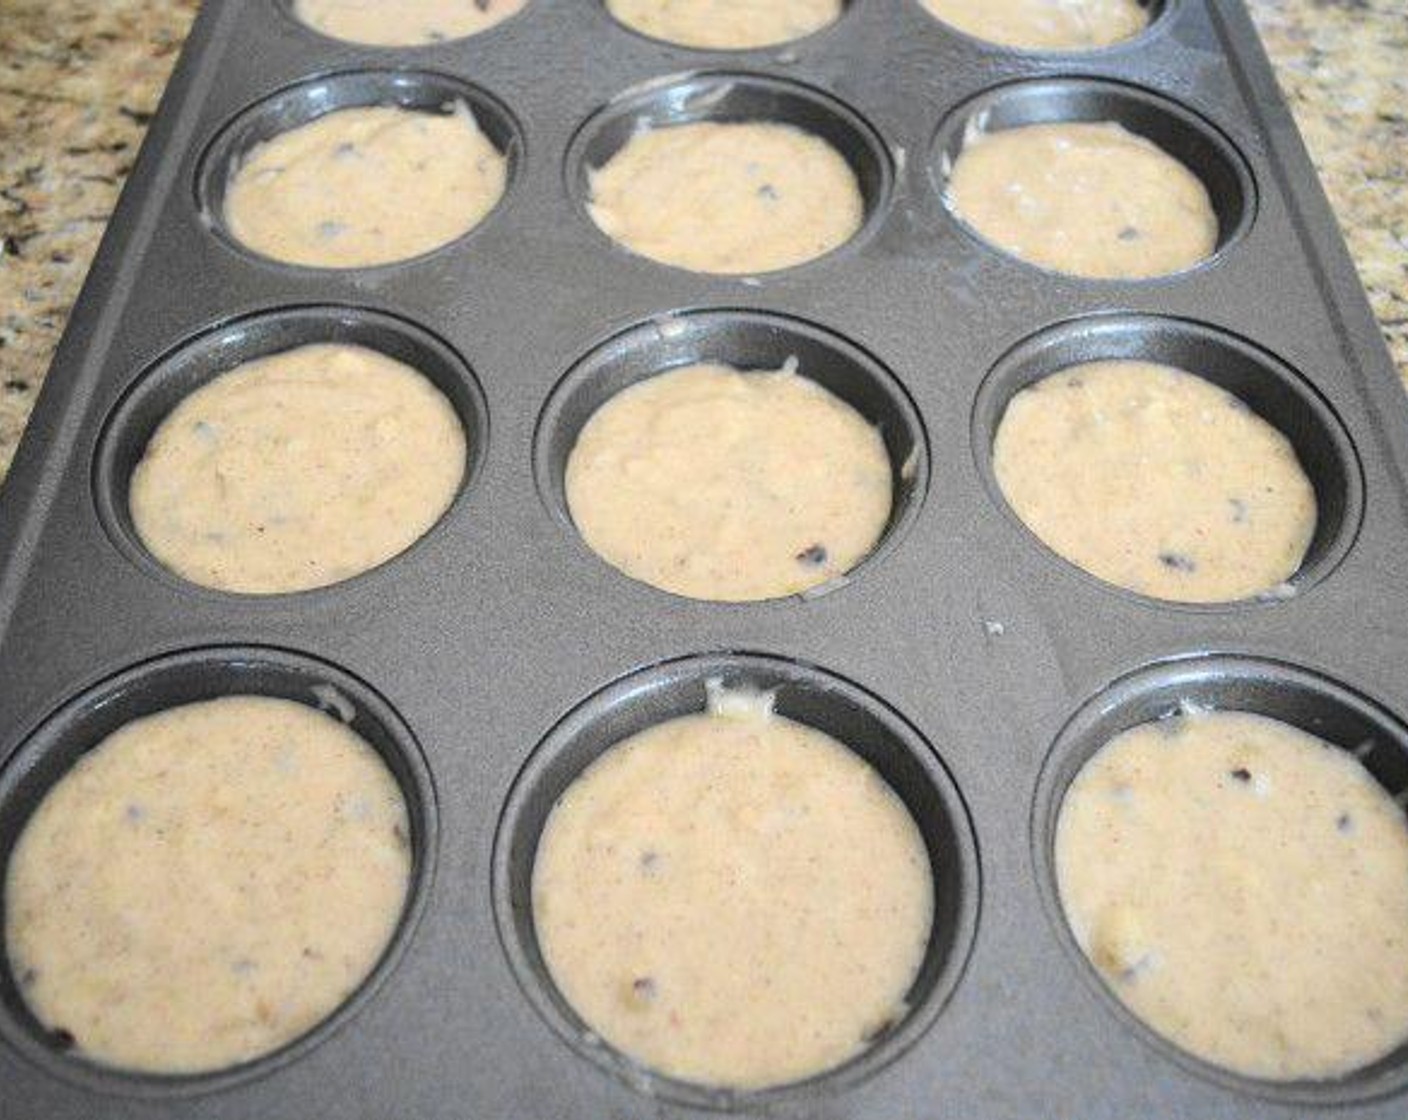 step 5 Use a heaping 1/4 cup to evenly distribute the batter among the 12 wells in the prepared muffin pan. Get the pan into the oven for them to bake for about 15 minutes. A toothpick inserted in the center should come out cleanly. Take them out and let them cool in the pan for a few minutes.